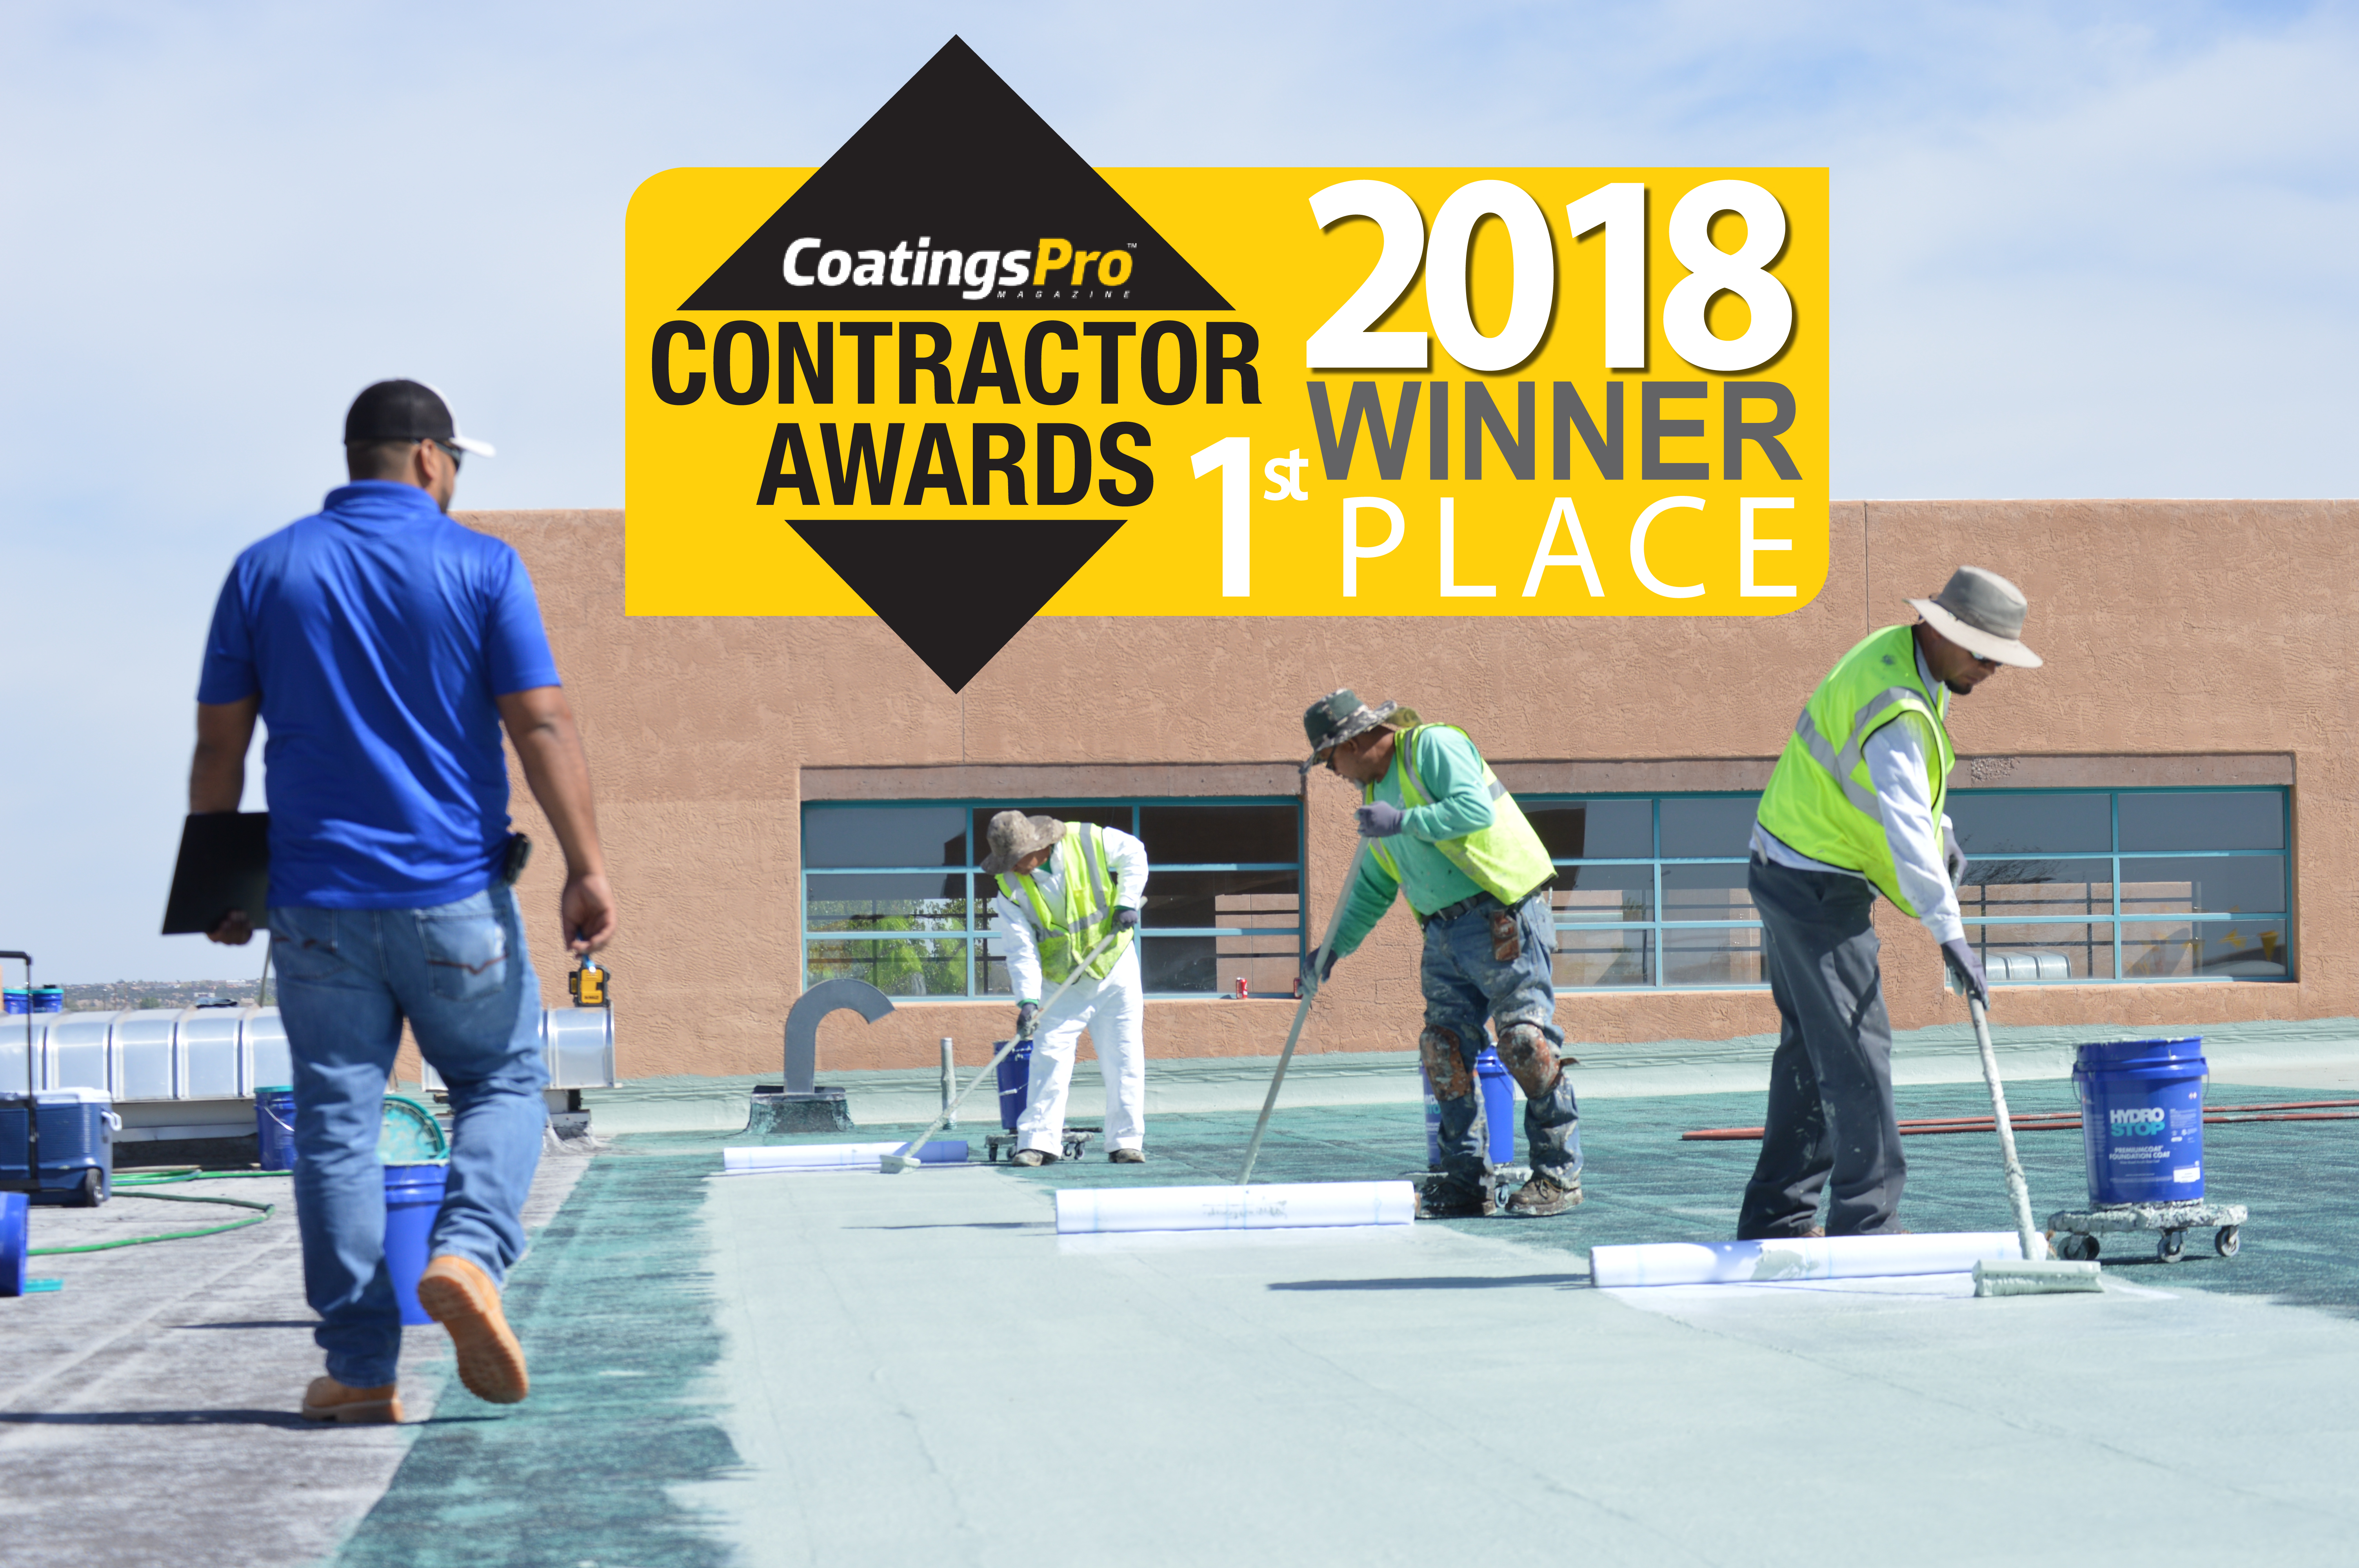 MAY - IndNews - RCMA -- Local Roofing Contractor, RoofCARE, Wins Back-to-Back National Awards